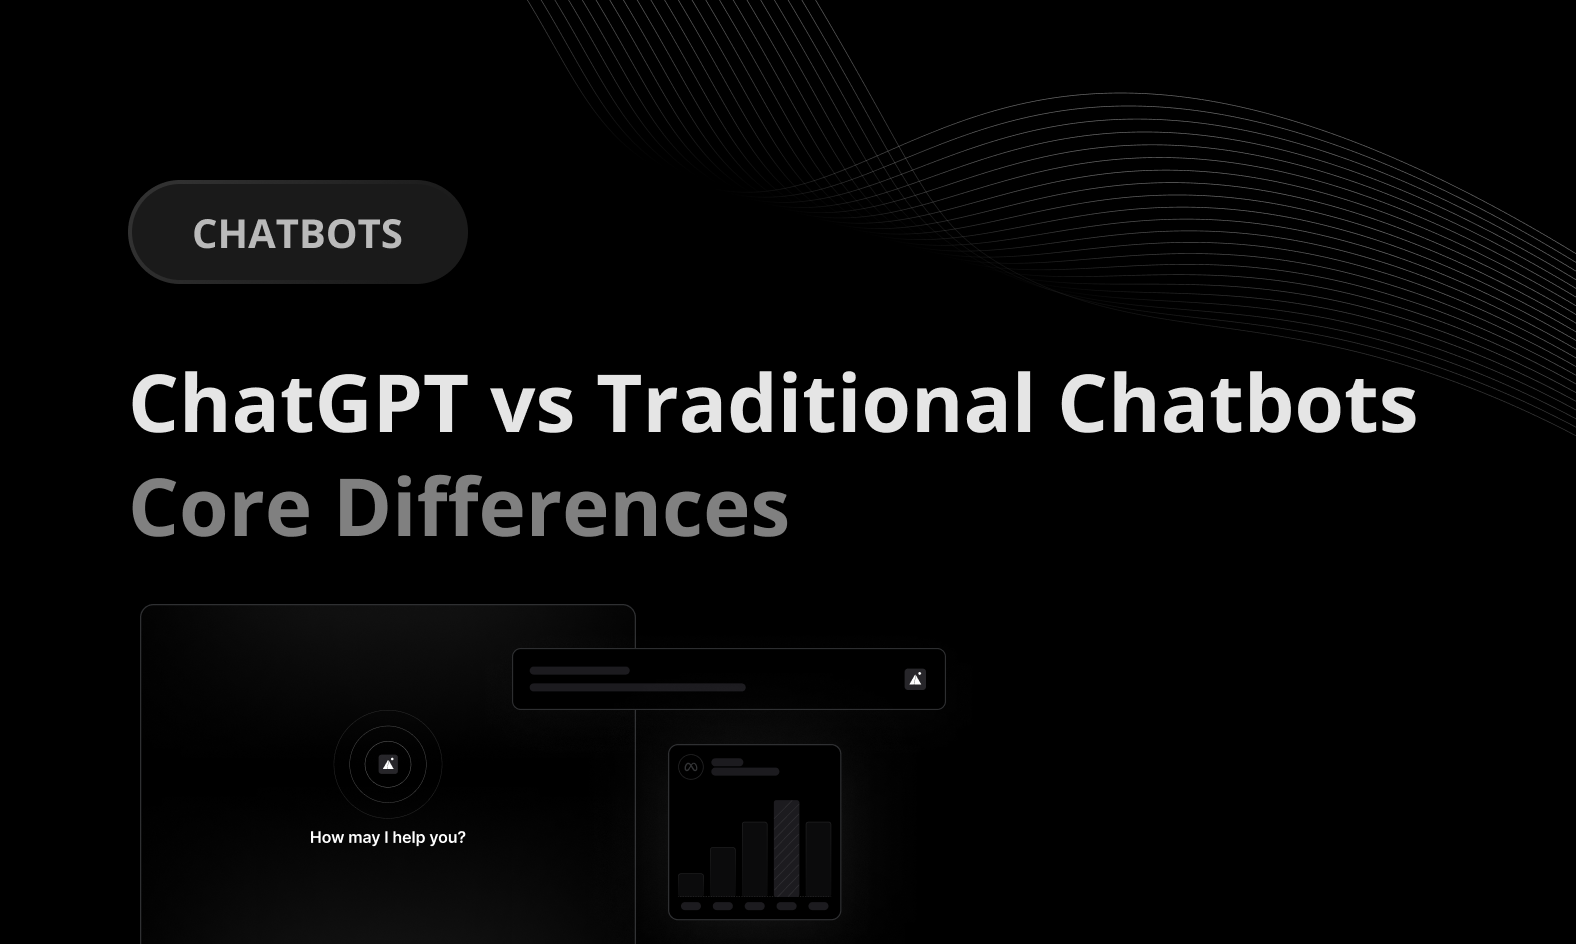 ChatGPT vs Traditional Chatbots: Core Differences